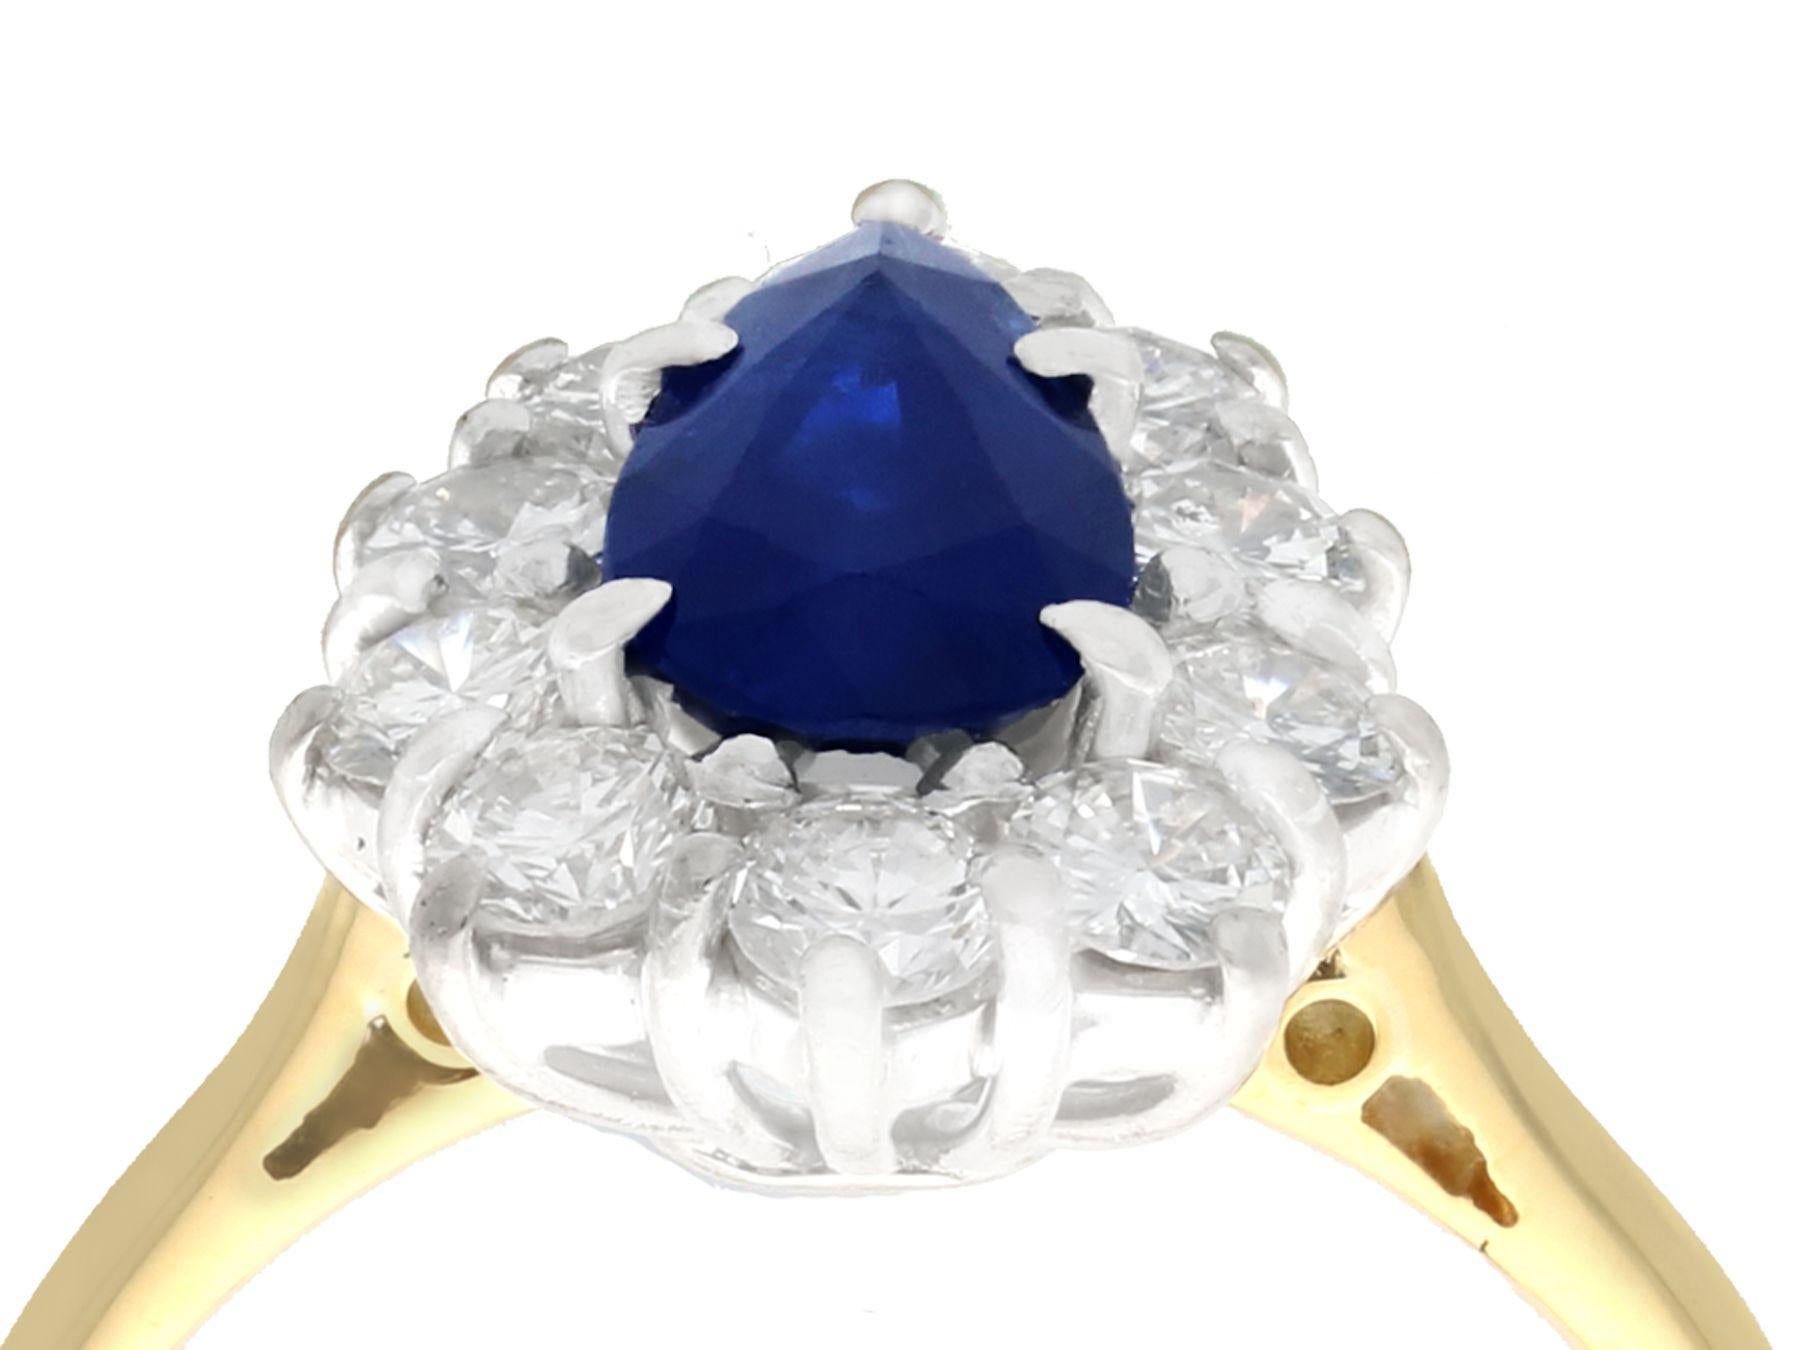 A fine and impressive vintage 1.40 carat sapphire and 0.68 carat diamond, 18 karat yellow and white gold cluster ring; part of our diverse gemstone jewelry and estate jewelry collections

This fine and impressive vintage sapphire cluster ring has